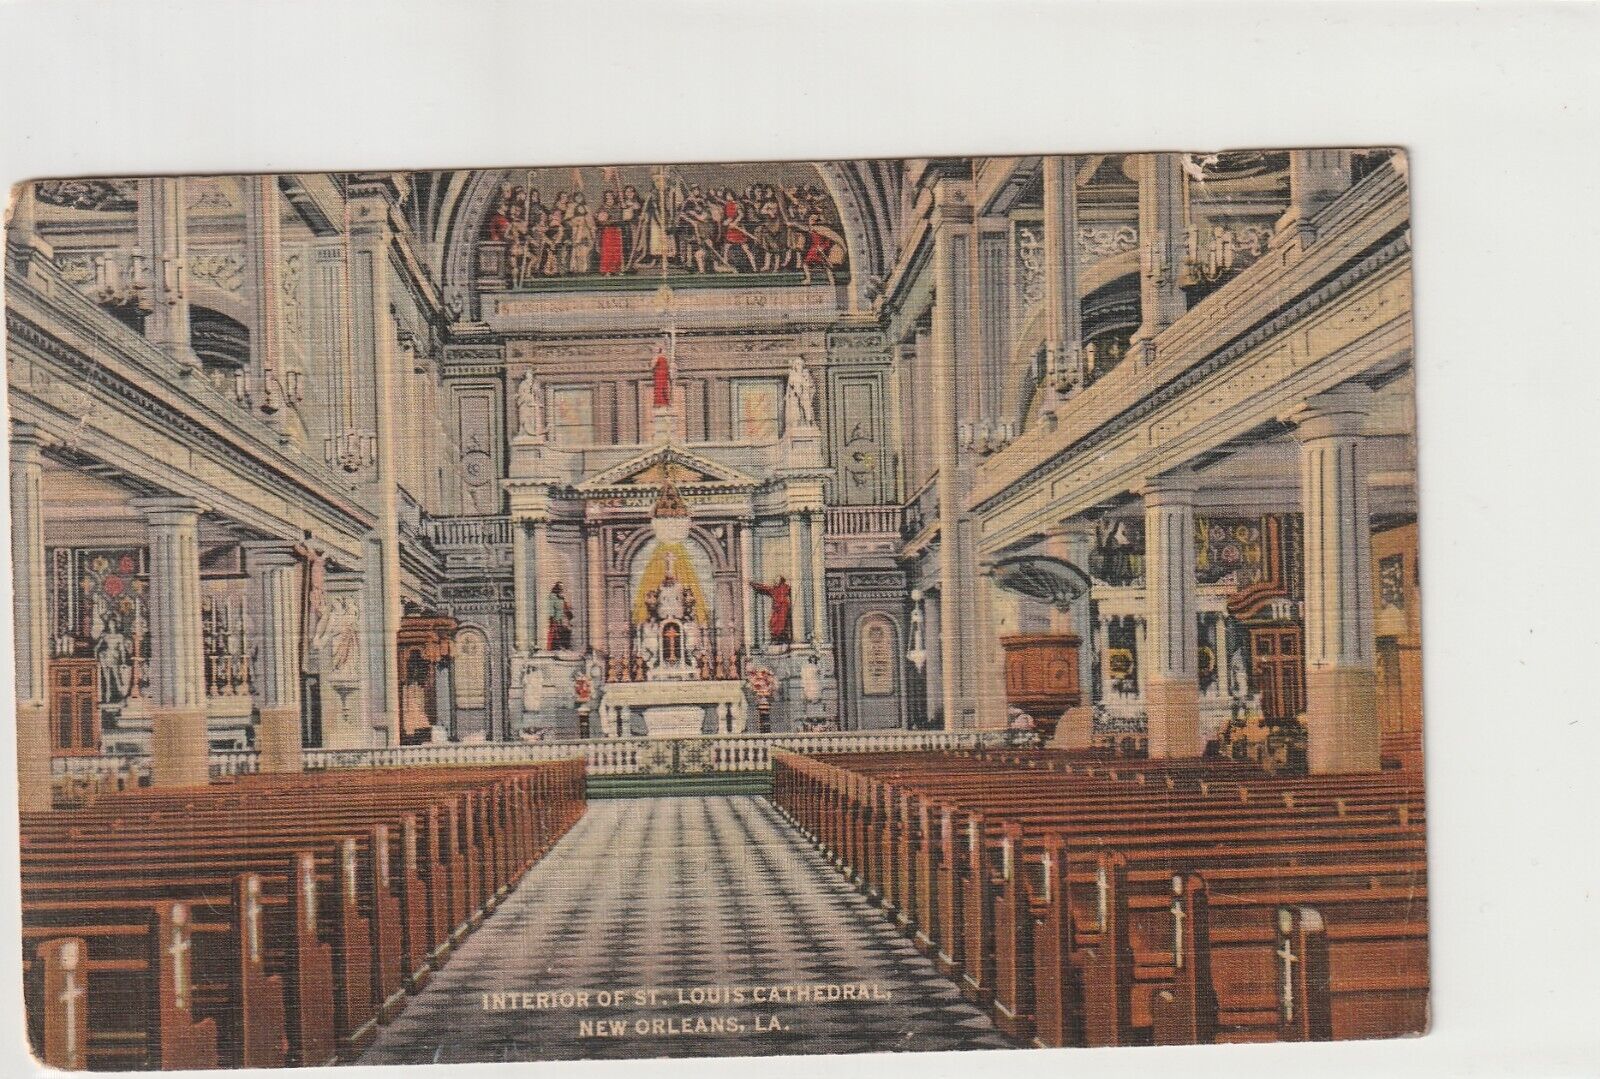 Vintage Postcard 1937 Interior of St. Louis Cathedral New Orleans, Louisiana